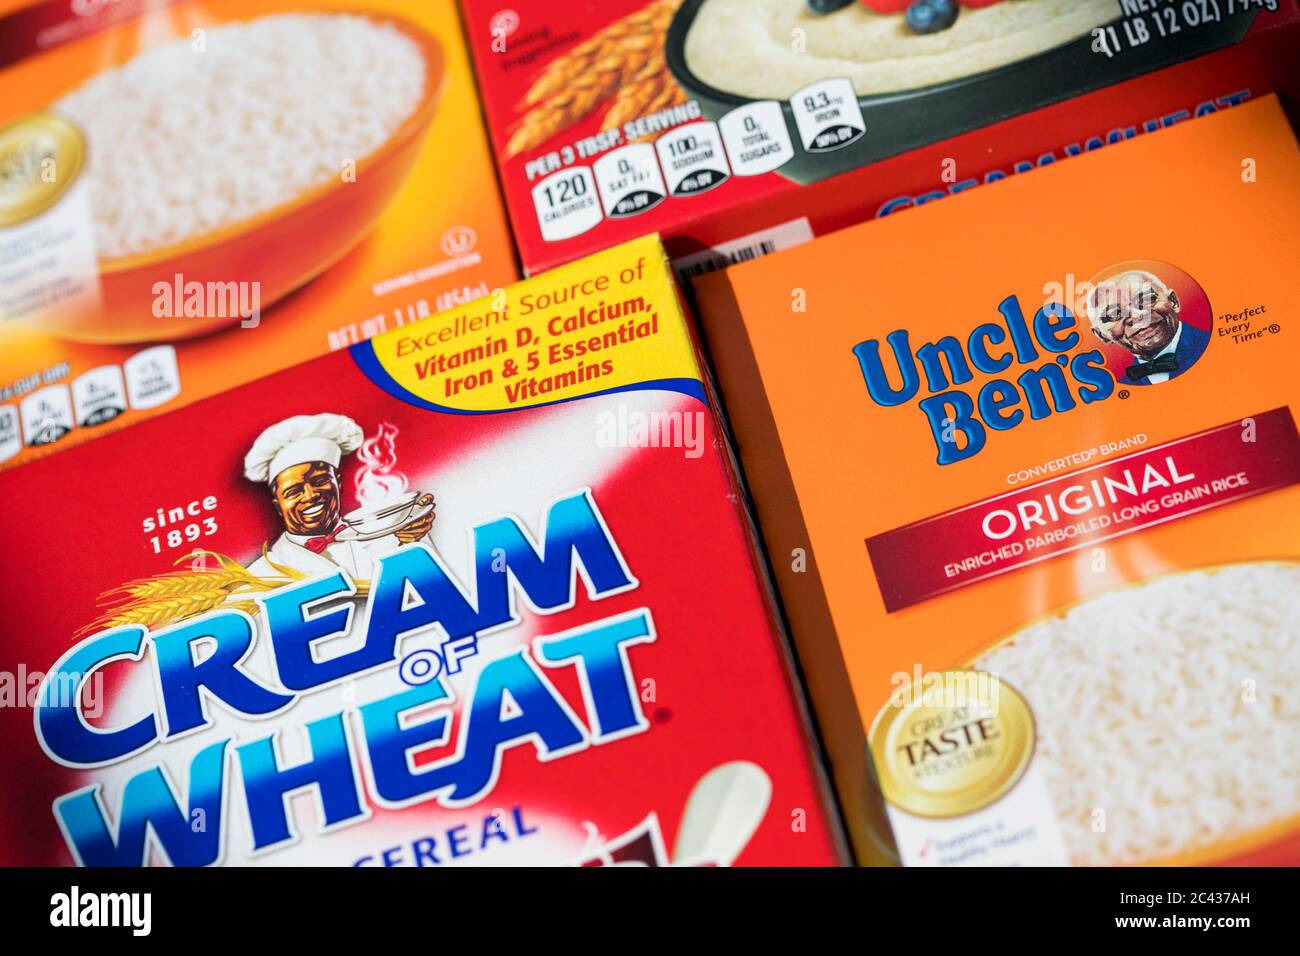 Boxes of Uncle Ben's and Cream of Wheat products. Stock Photo